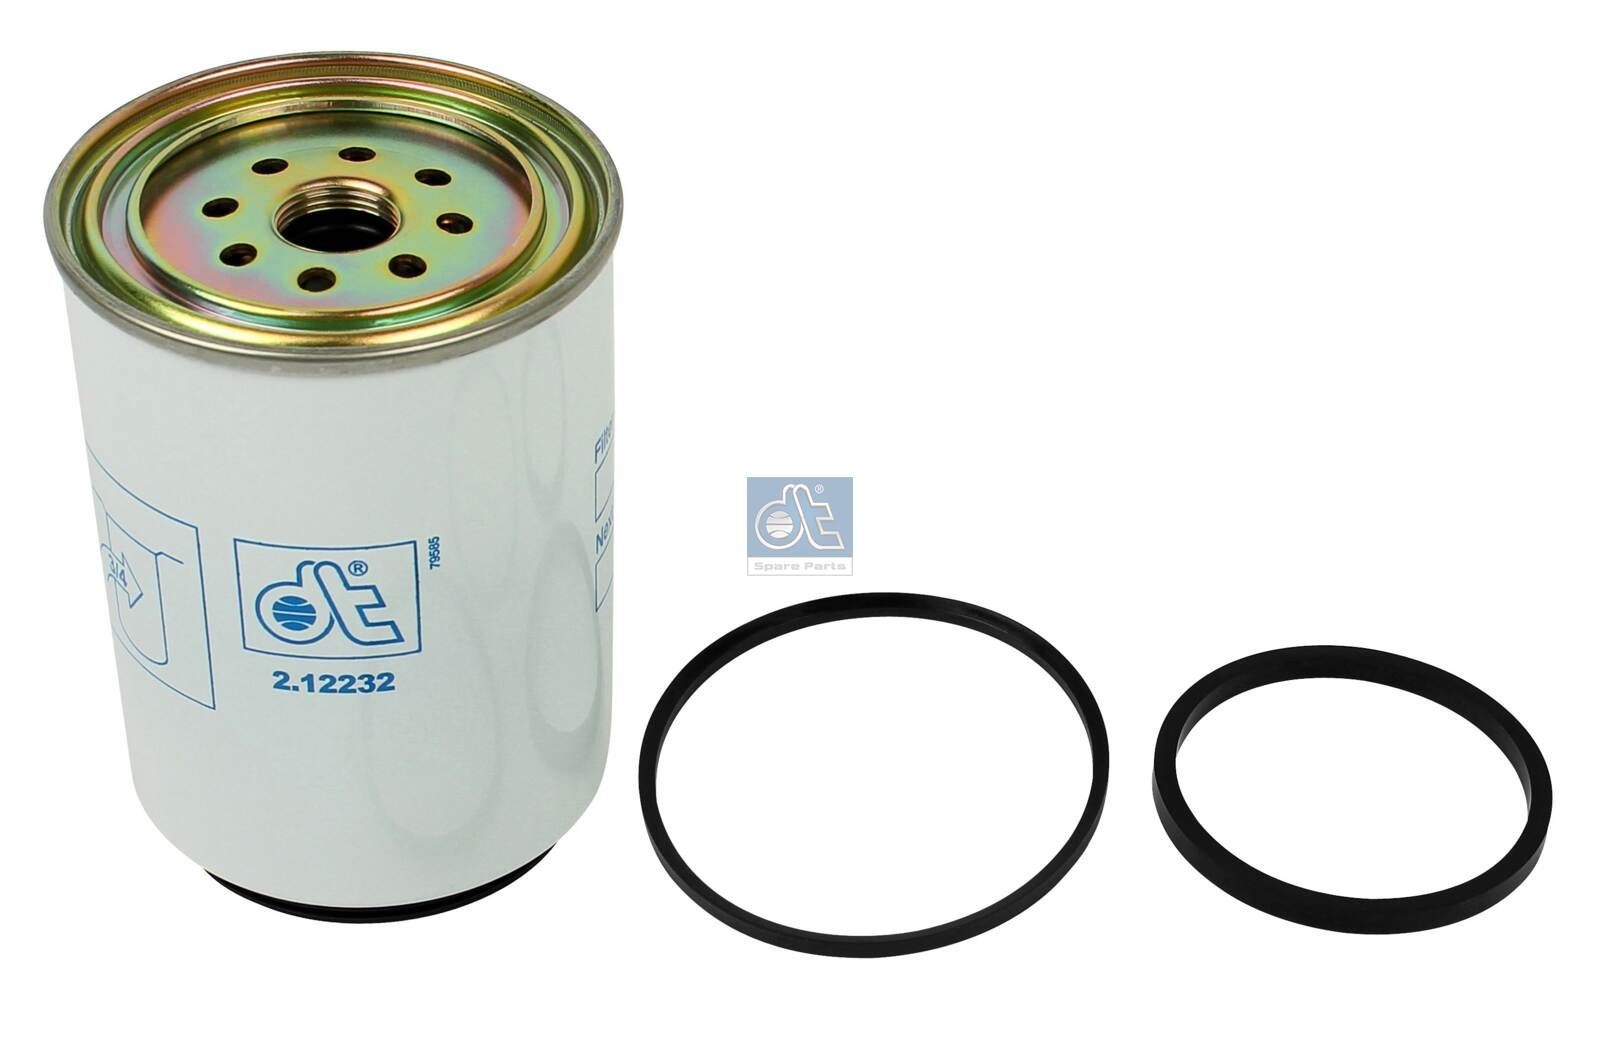 WK 1060/3 x DT Spare Parts 2.12232 Fuel filter 51 1250 30066